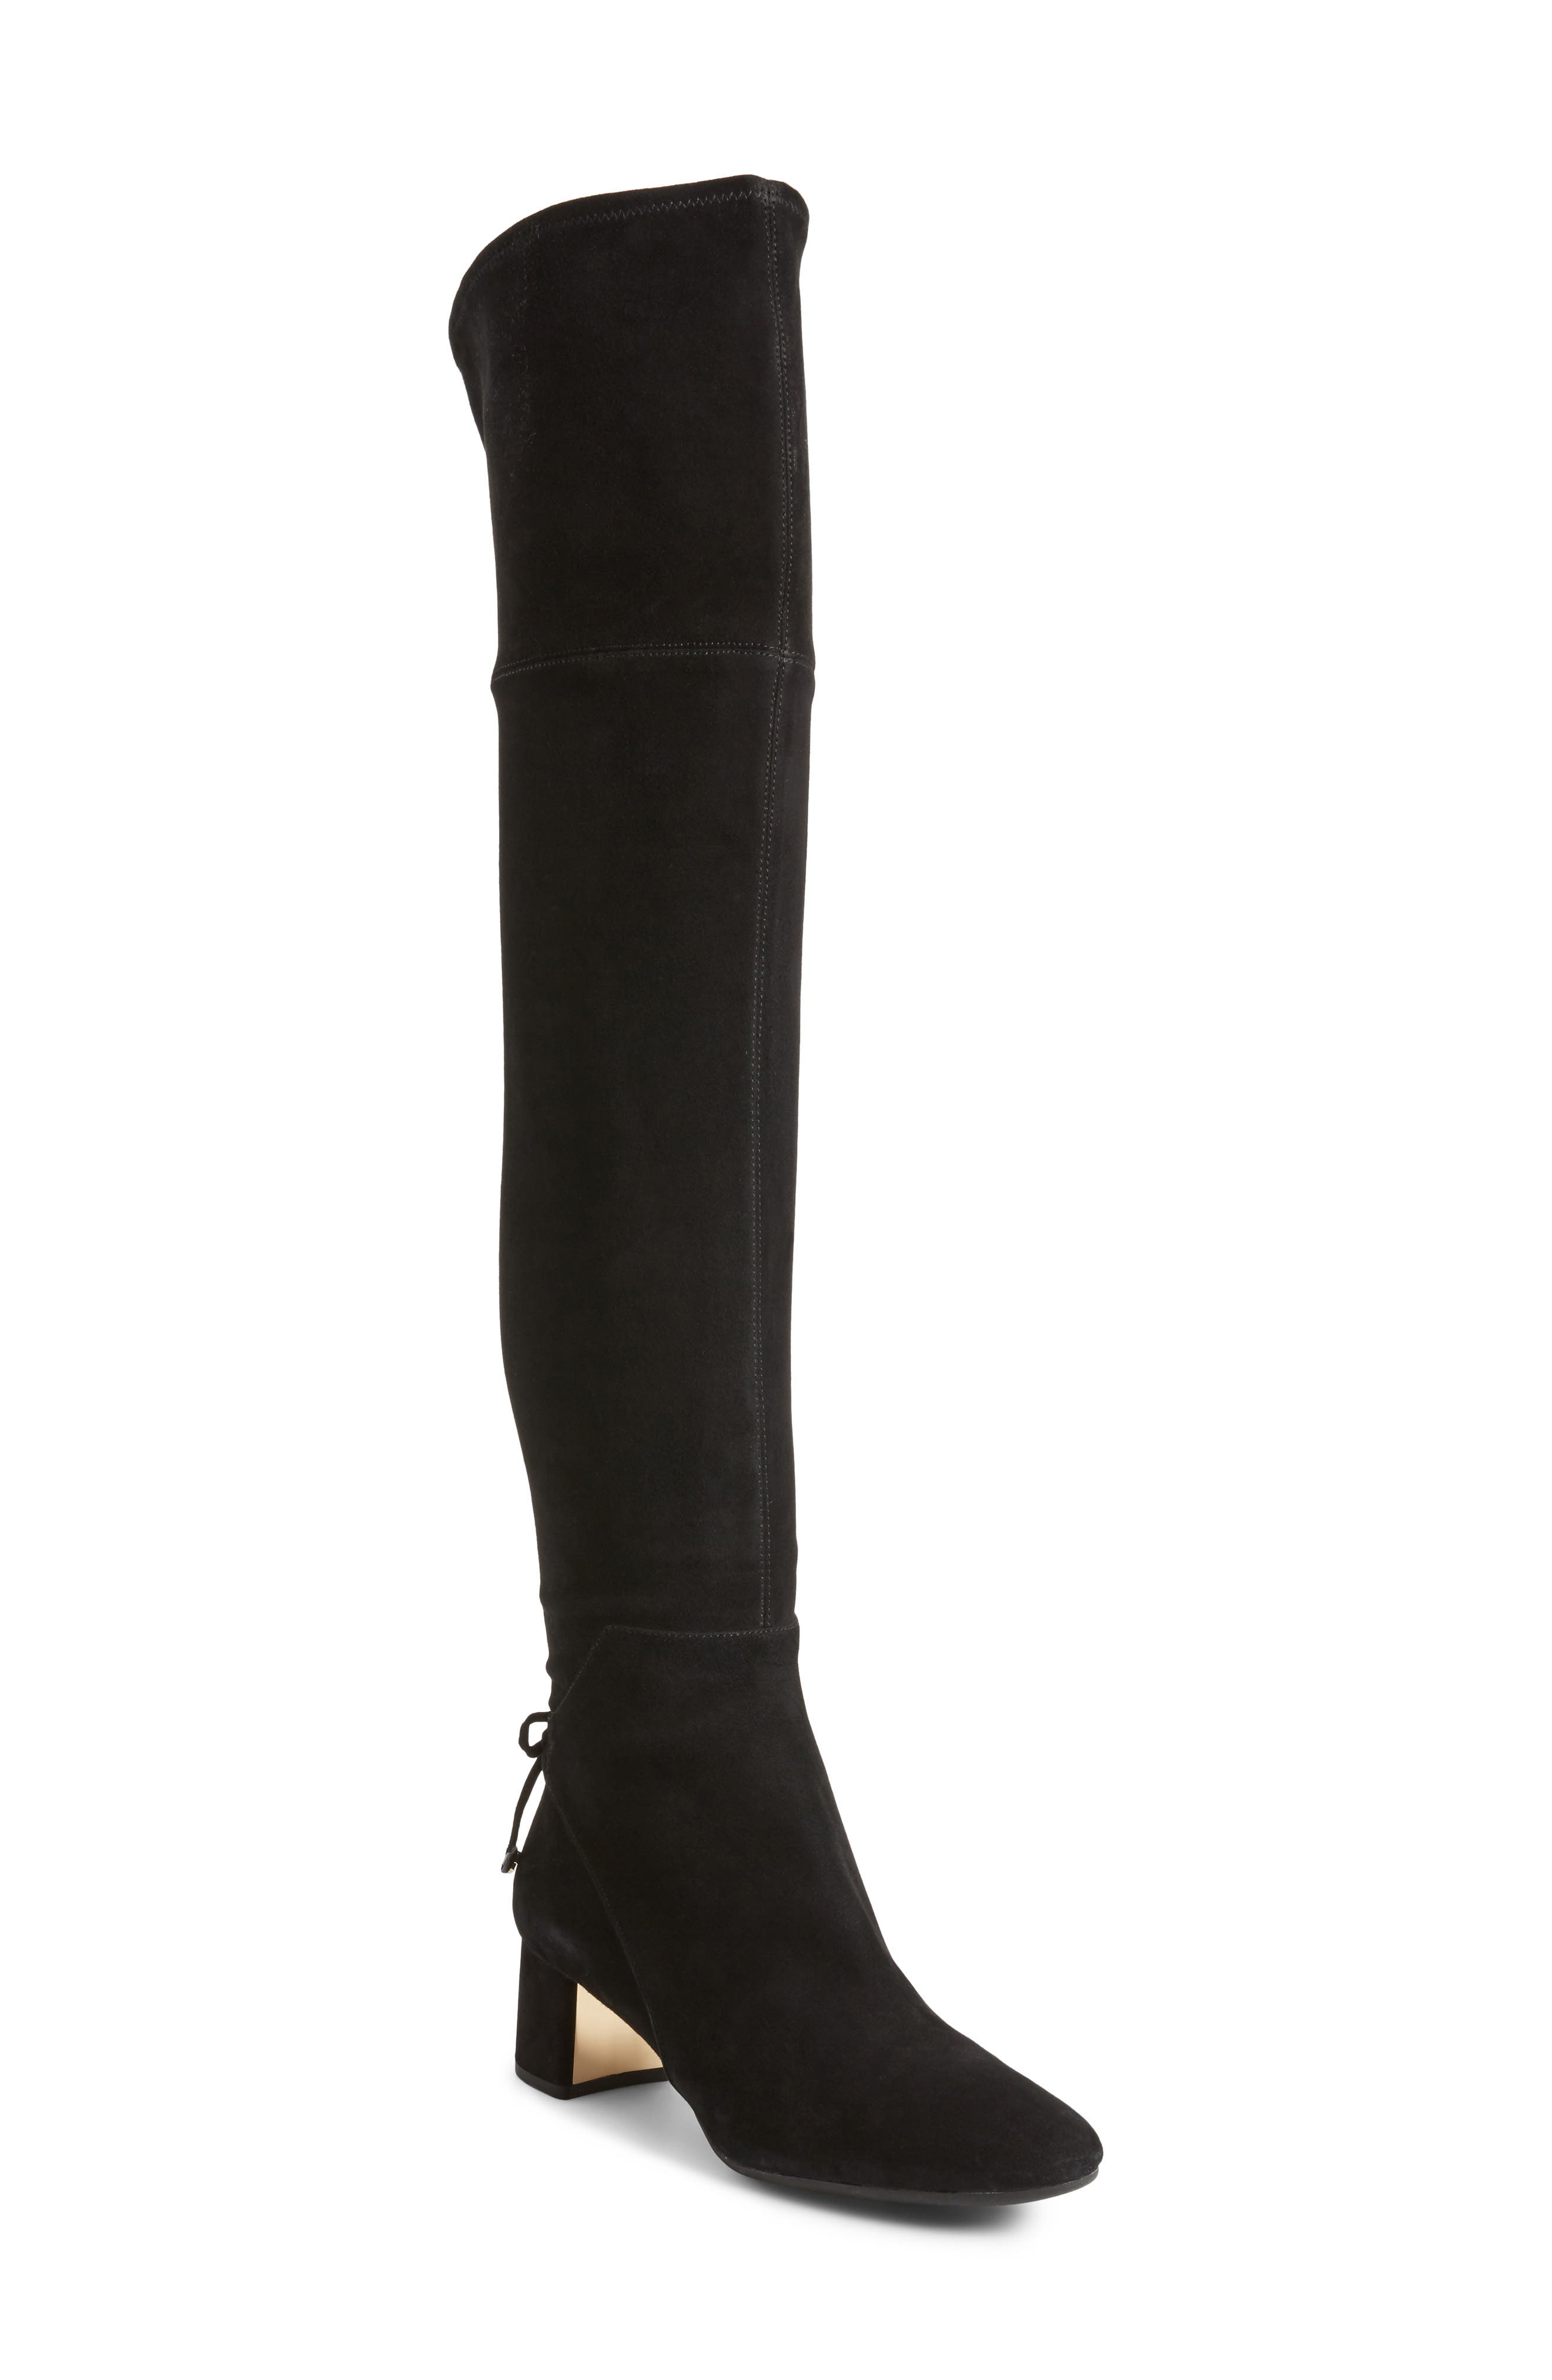 tory burch boot sizing